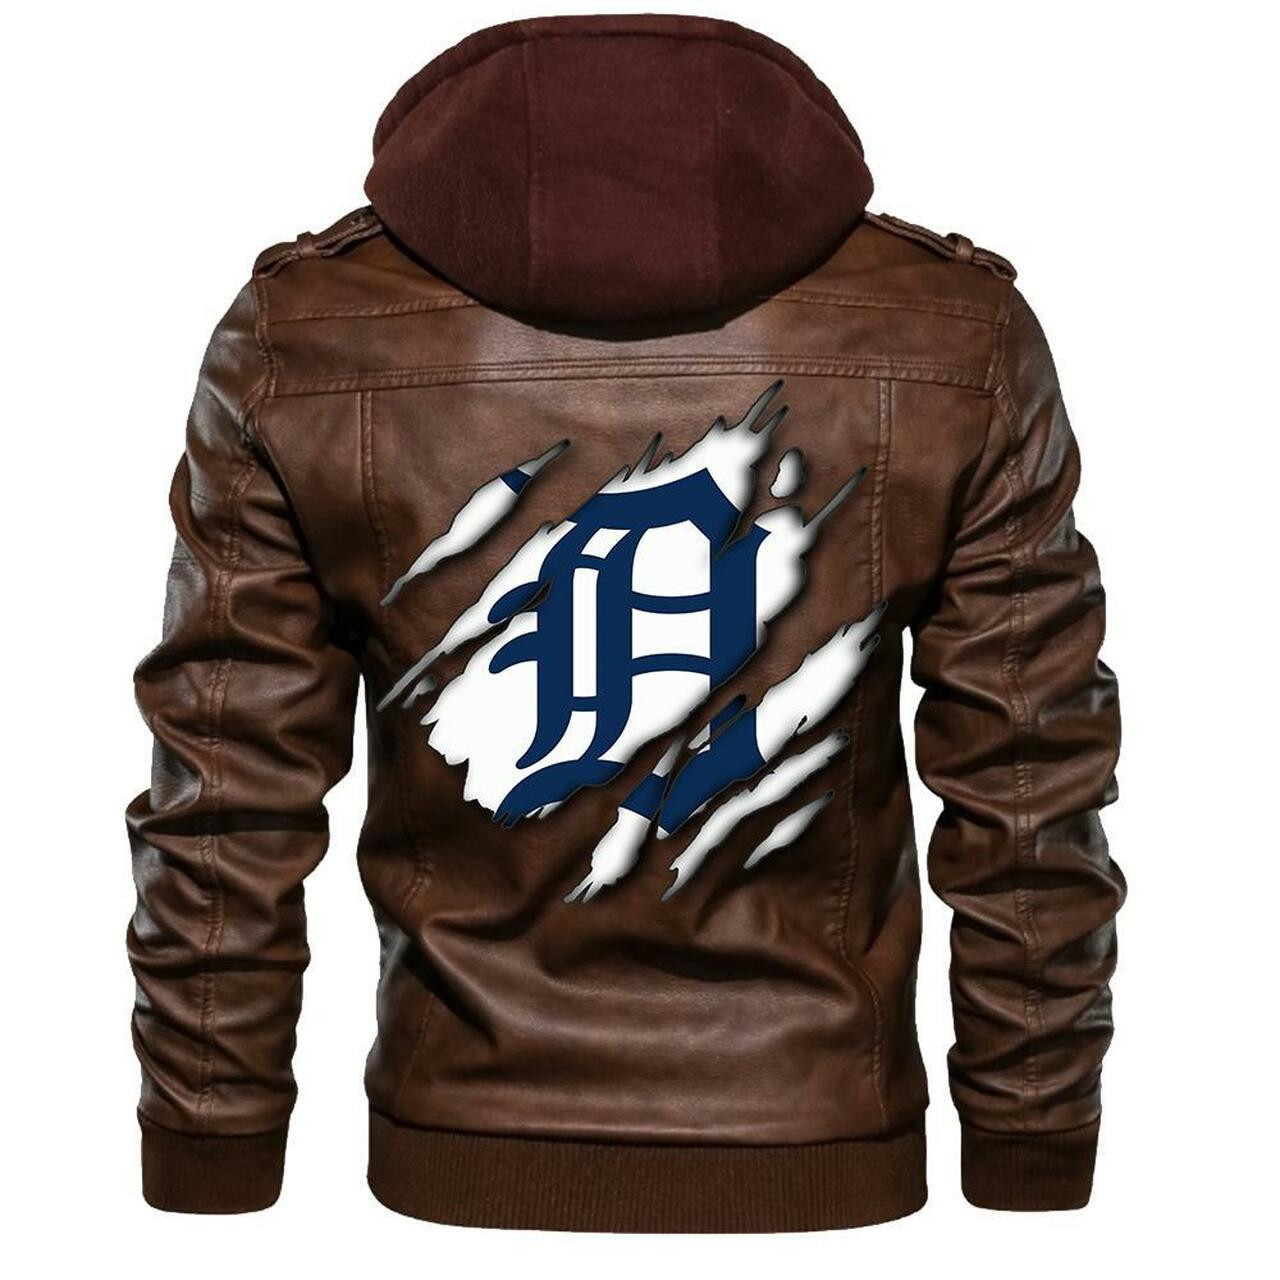 This leather Jacket will look great on you and make you stand out from the crowd 365